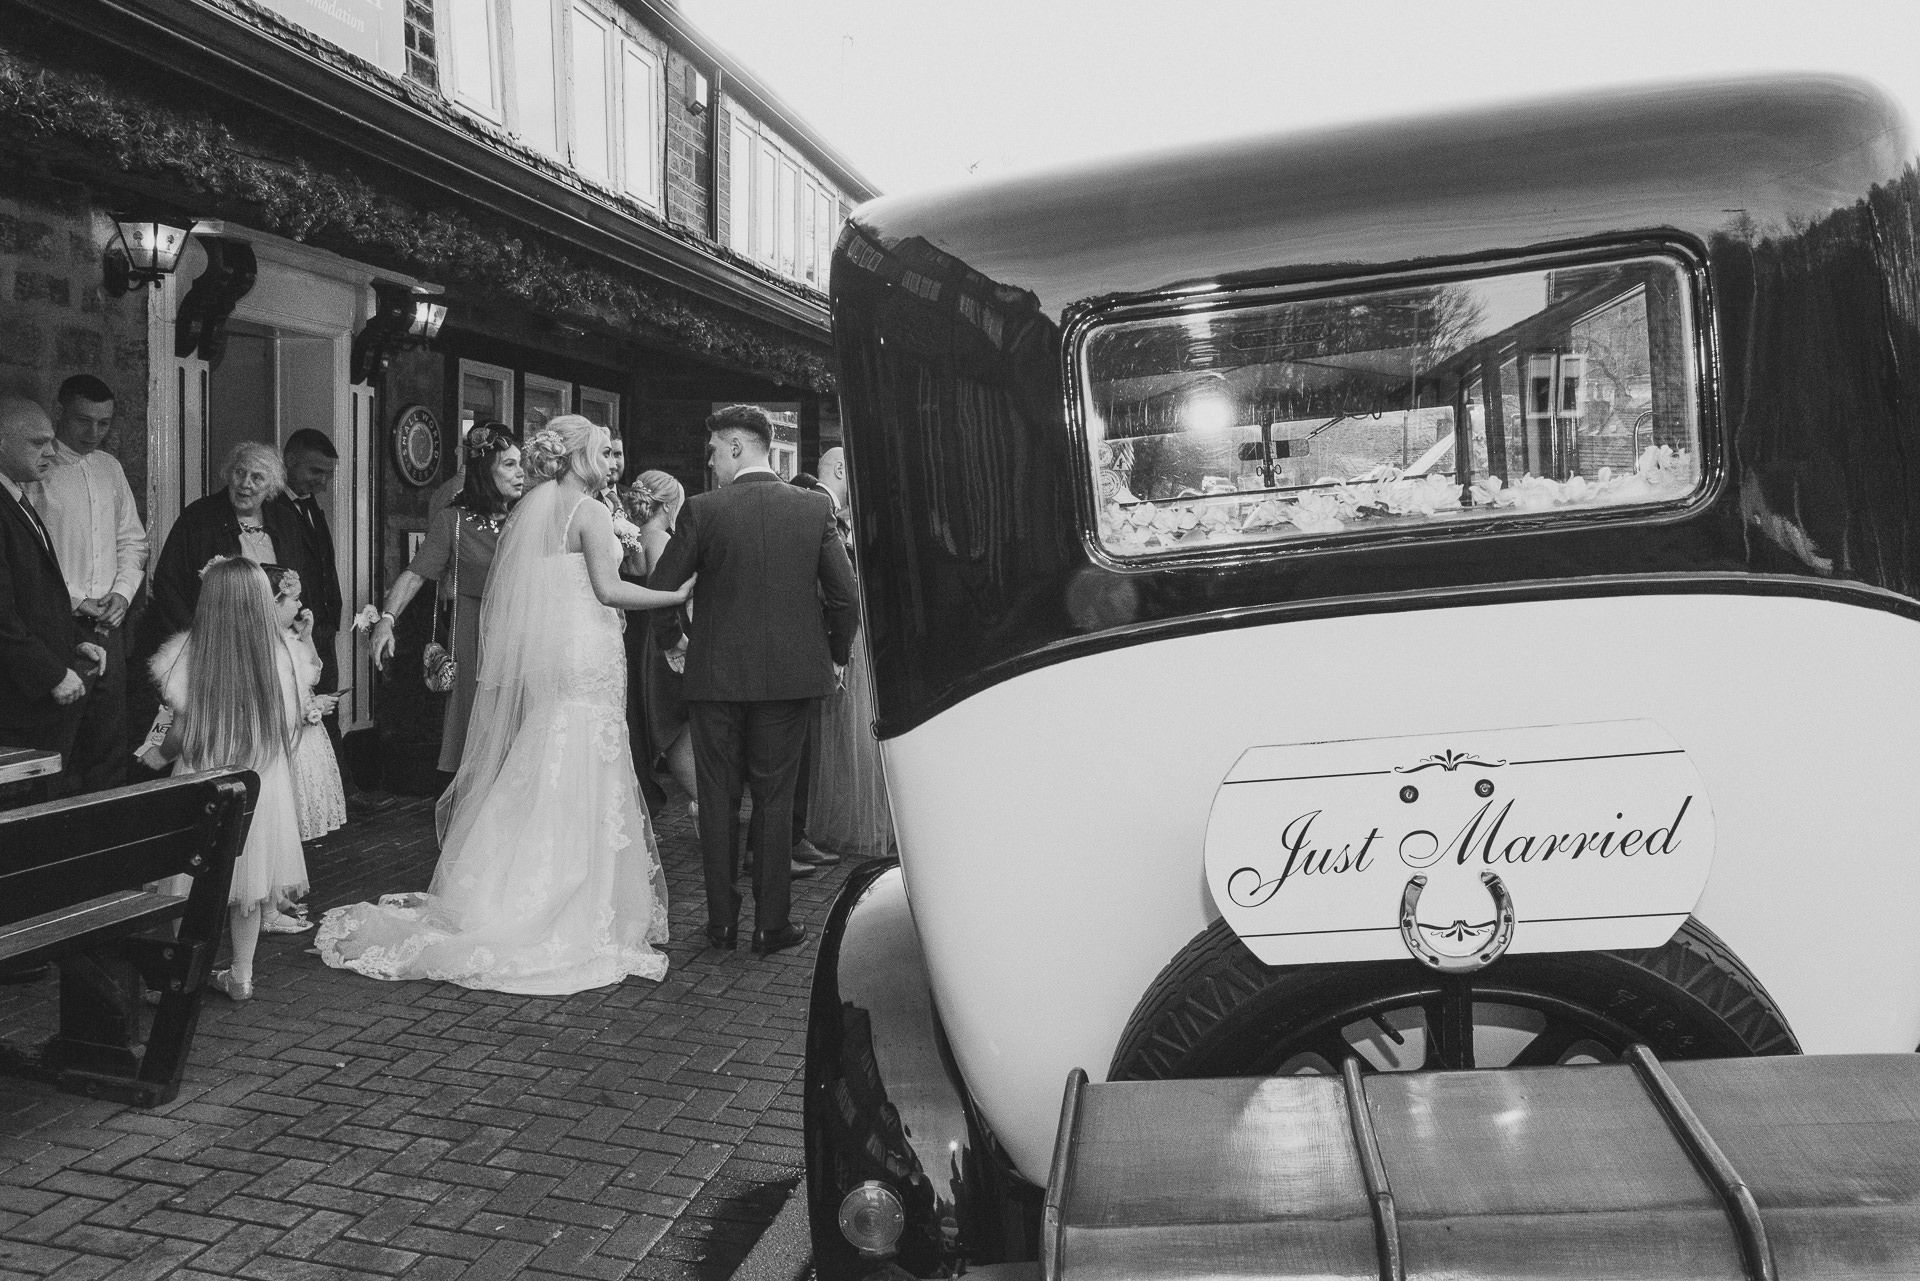 view of back of wedding car with bride and groom stood to the side